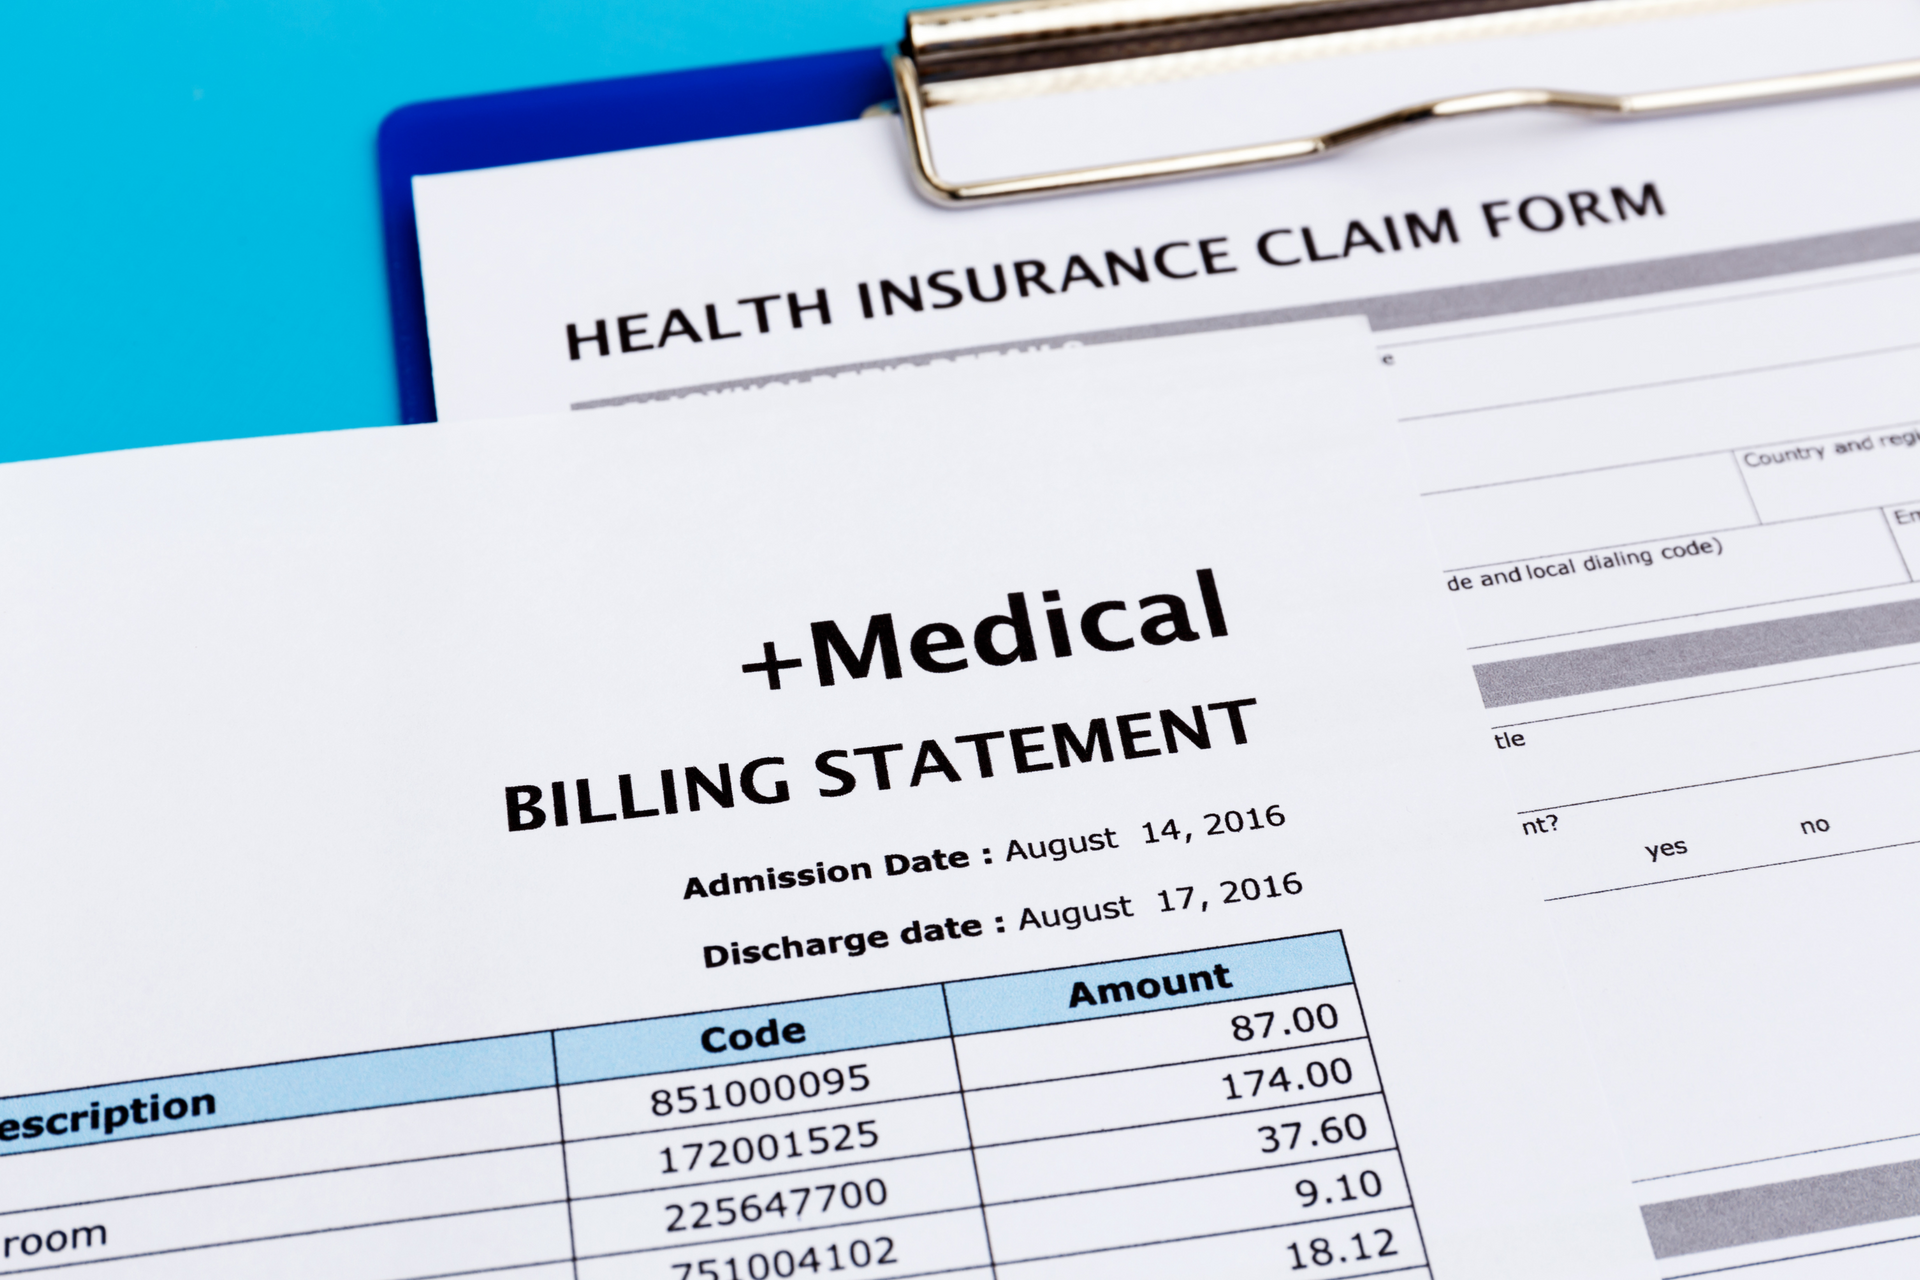 Medical billing statements and medical insurance forms